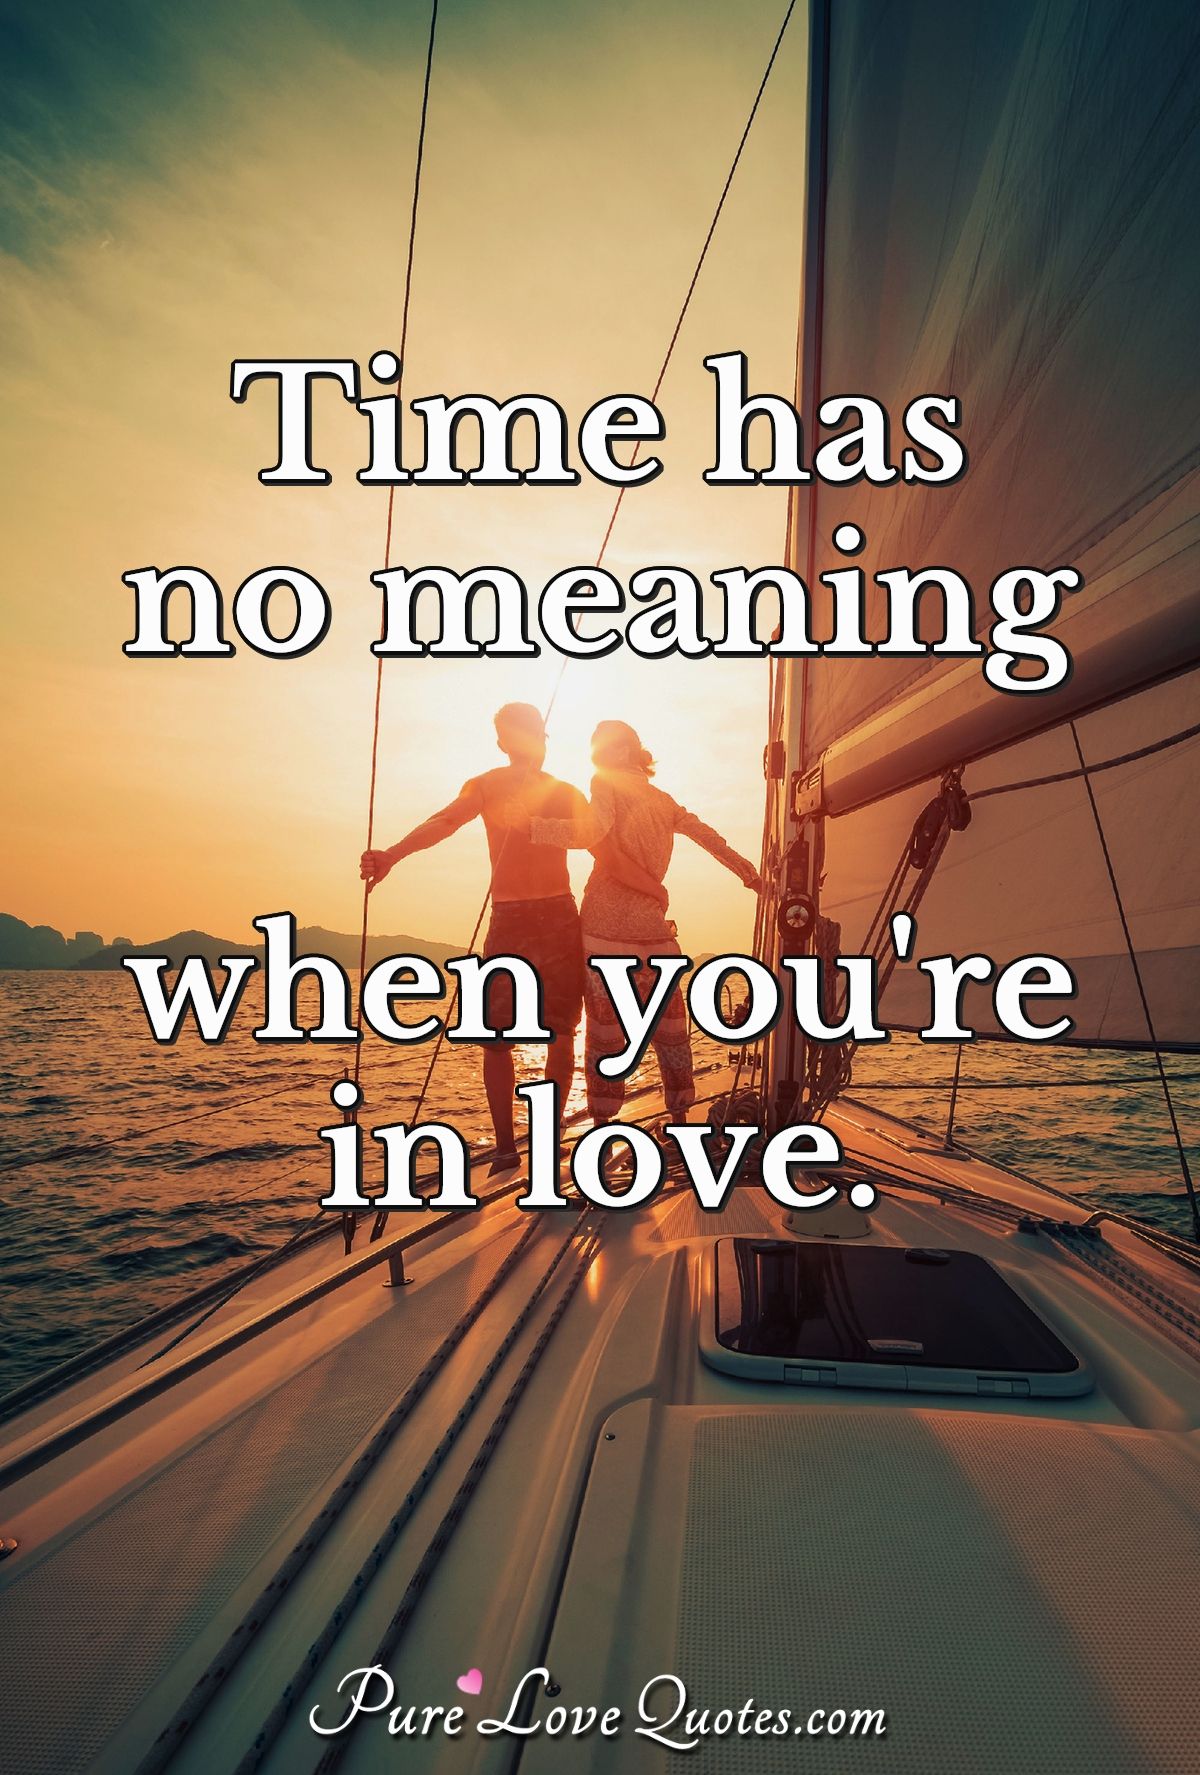 Time has no meaning when you're in love. - Anonymous